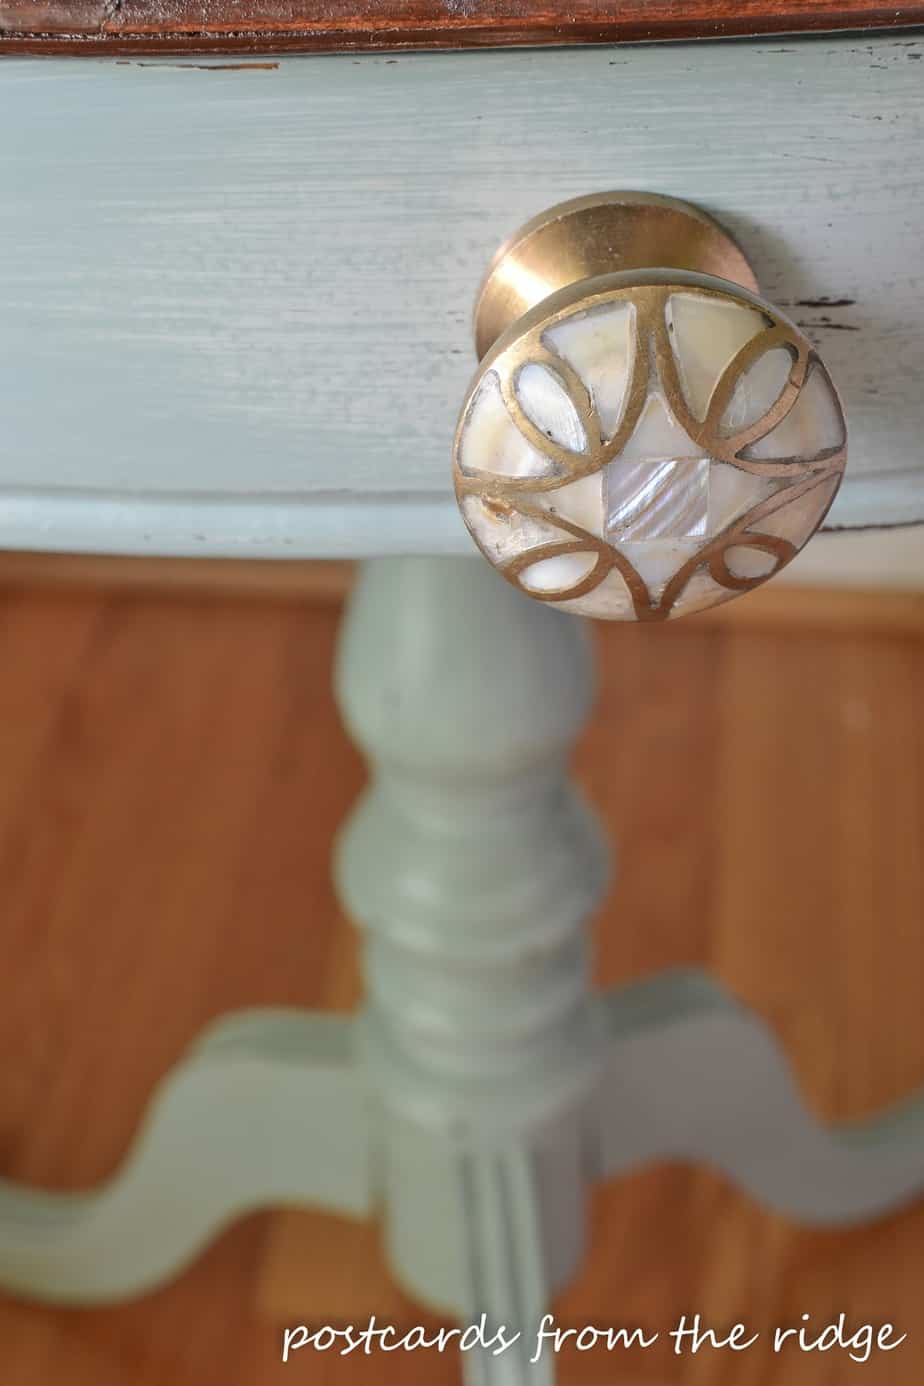 This beautiful knob from Anthrolpologie was the inspiration for this painted table makeover.